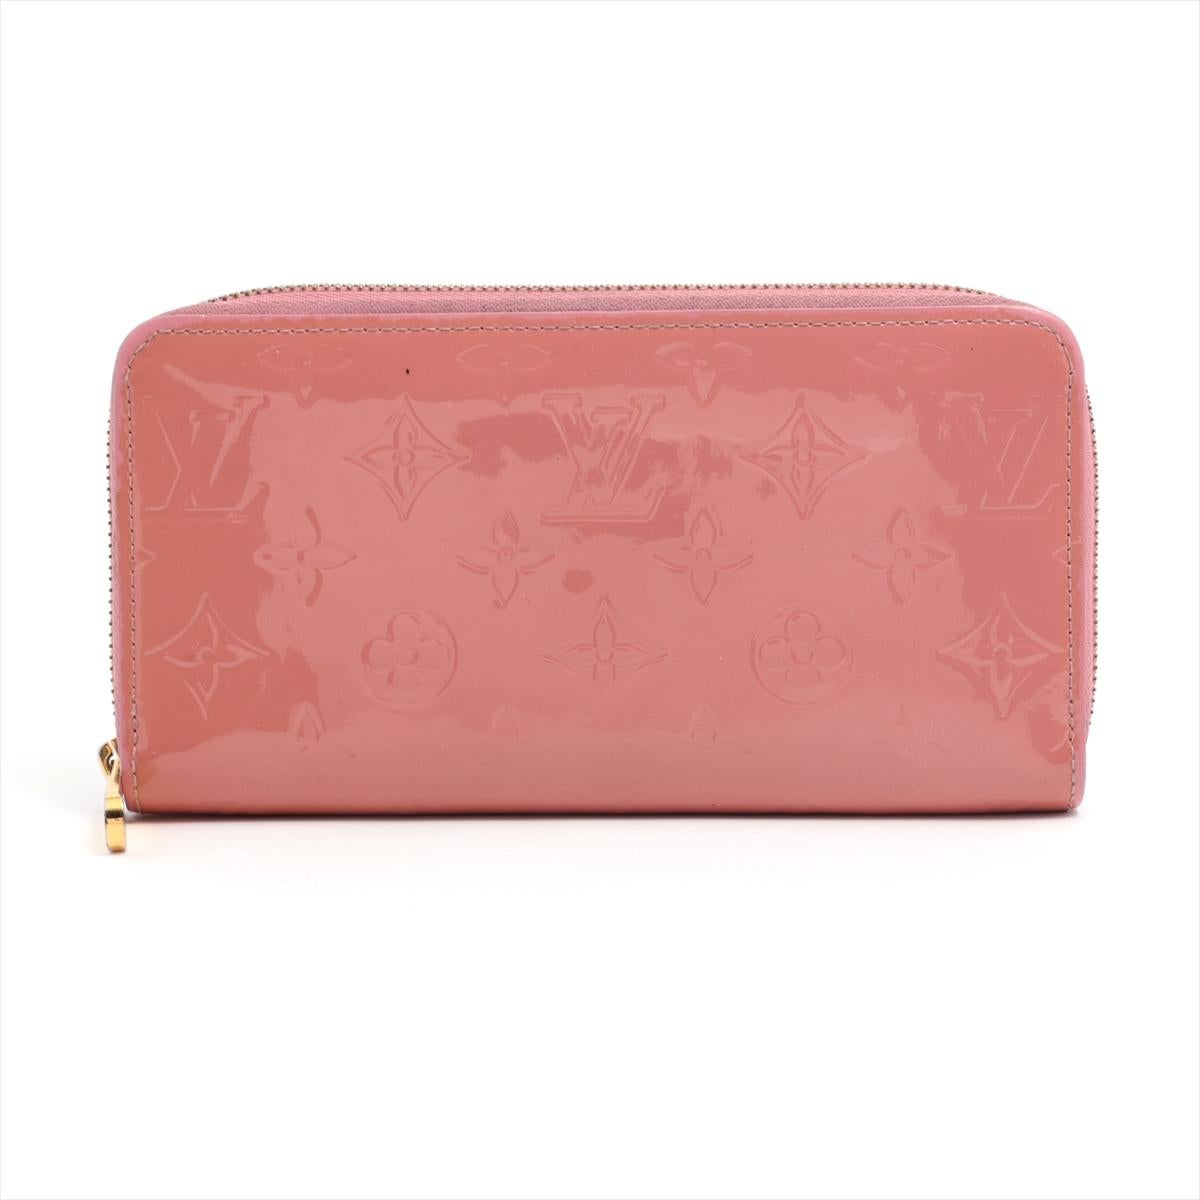 The Louis Vuitton Vernis Zippy Long Wallet in Rose Ballerine is a luxurious and stylish accessory that exudes elegance and sophistication. Crafted from glossy Vernis patent leather, the wallet features a beautiful soft pink hue. The iconic LV